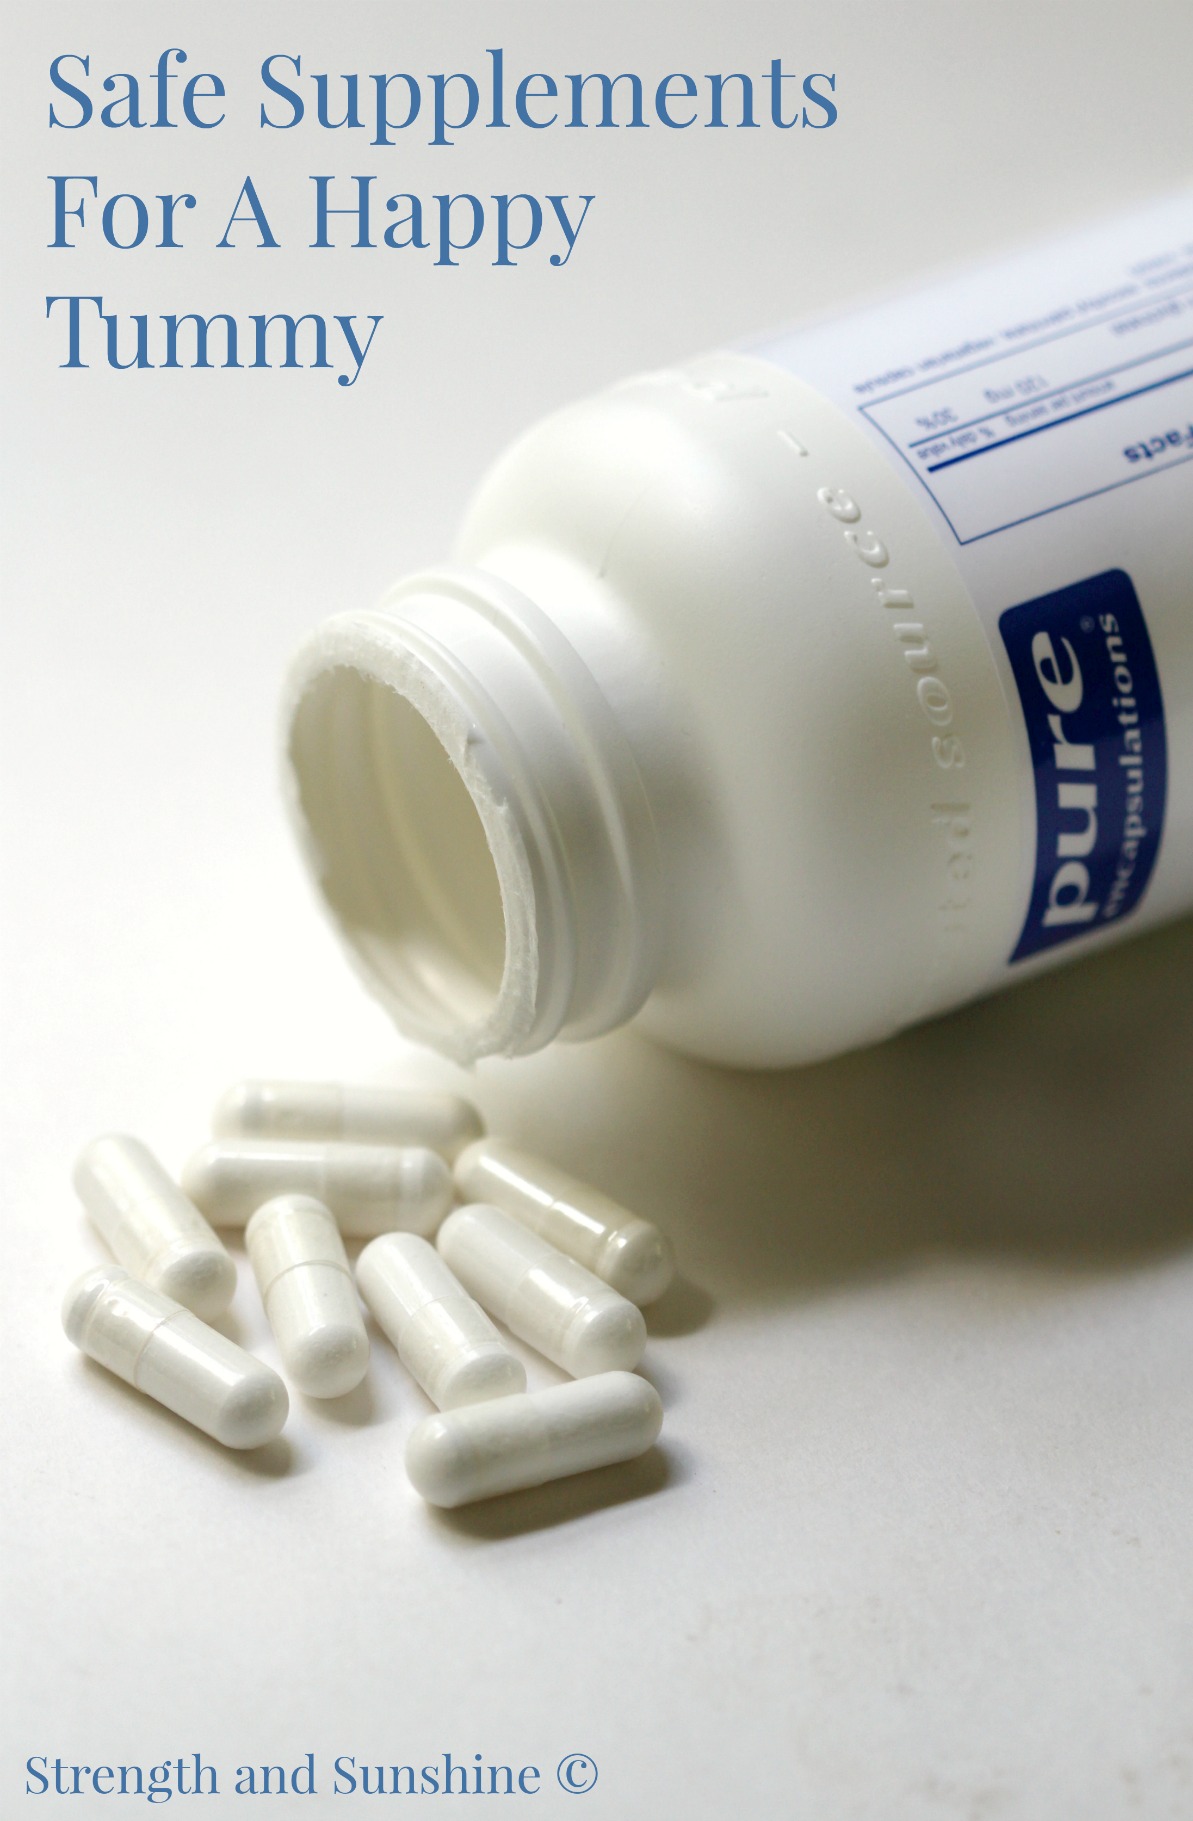 Safe Supplements For A Happy Tummy | Strength and Sunshine @RebeccaGF666 With food allergies and autoimmune diseases, keeping the body safe and happy is the ultimate goal. Finding safe pure supplements can provide some healthy insurance for keeping your inner-workings at their optimal best! @PureEncapsulations 